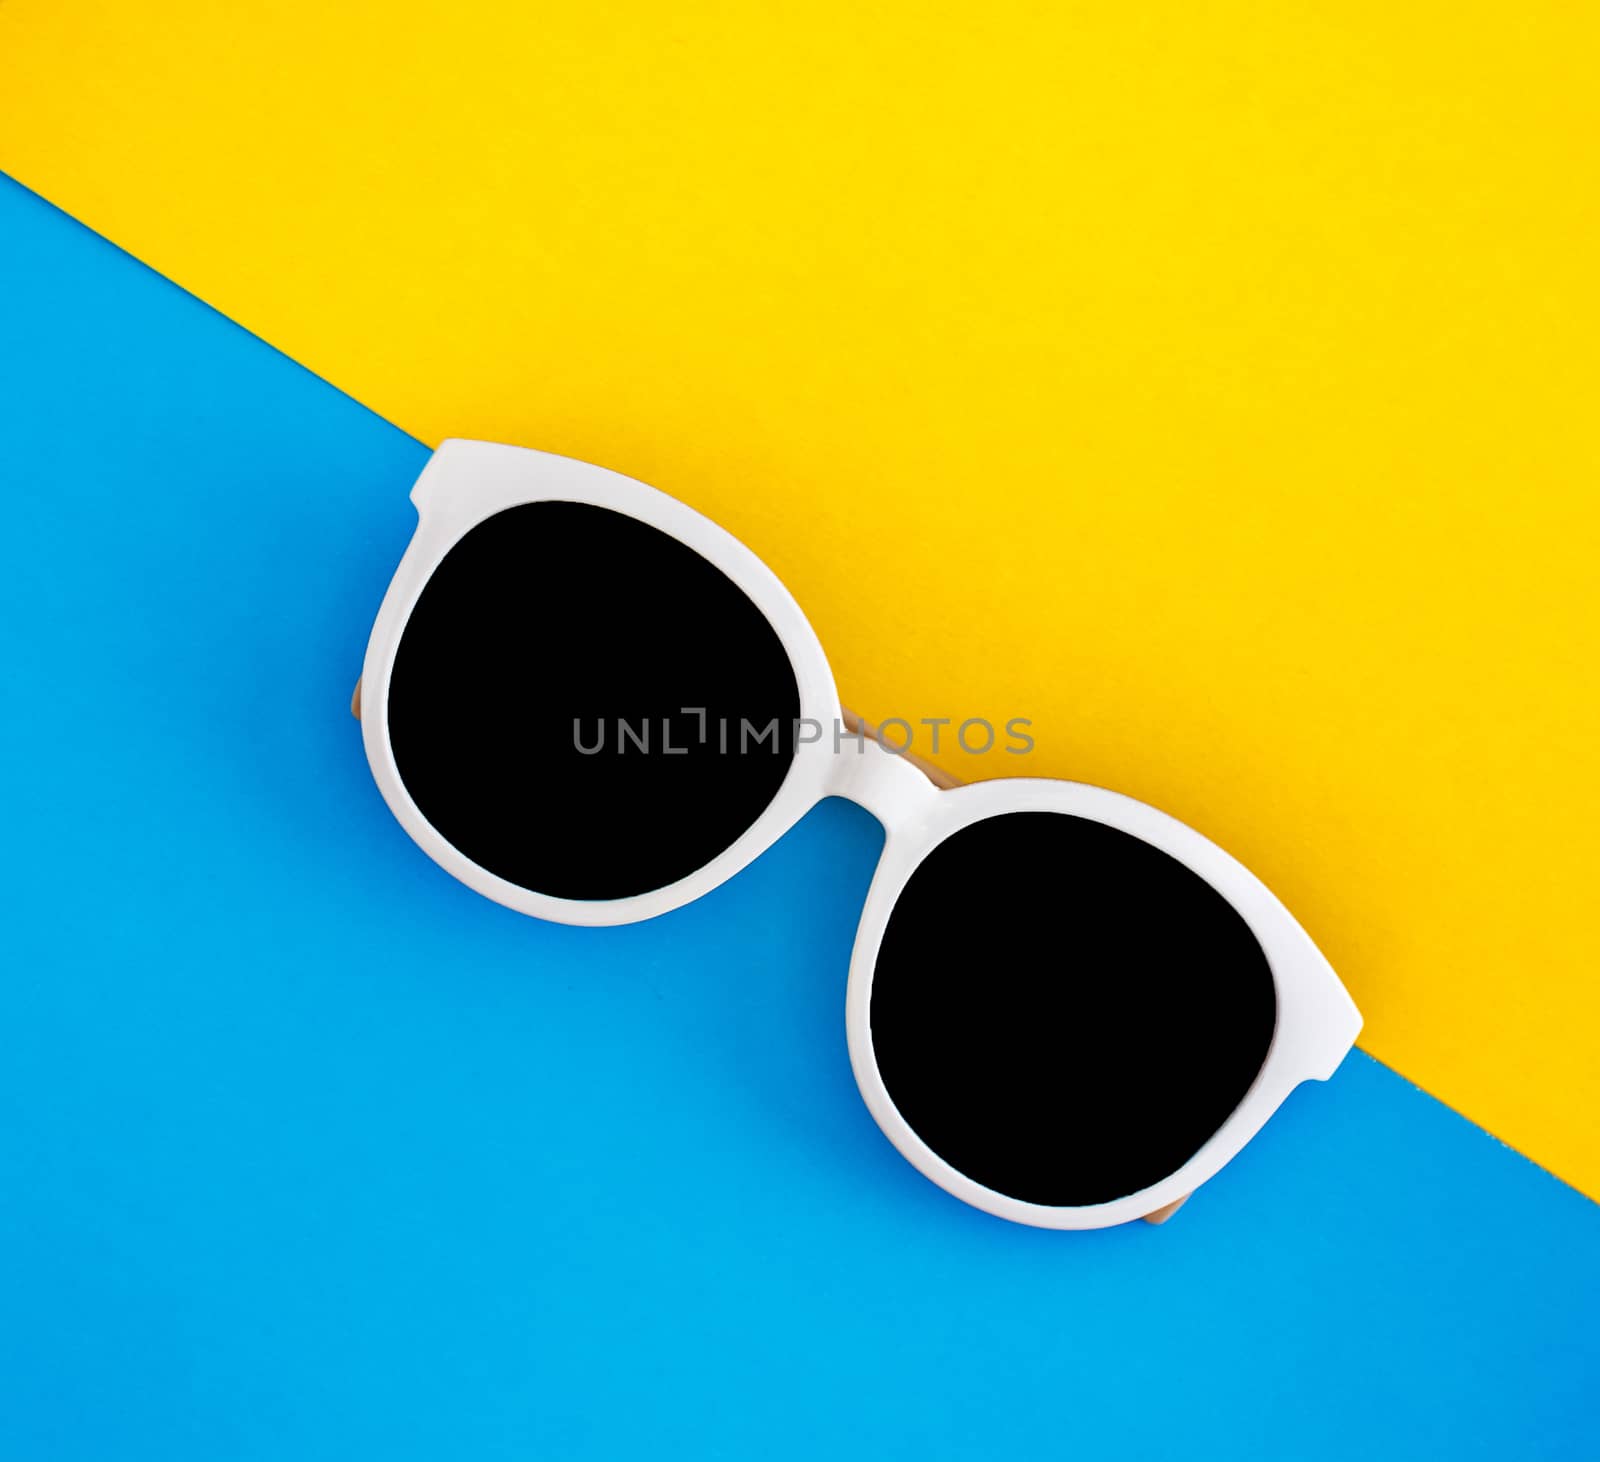 Sunny stylish white sunglasses on a bright blue-cyan and yellow-orange background, top view, isolated. Copy space. Flat lay.